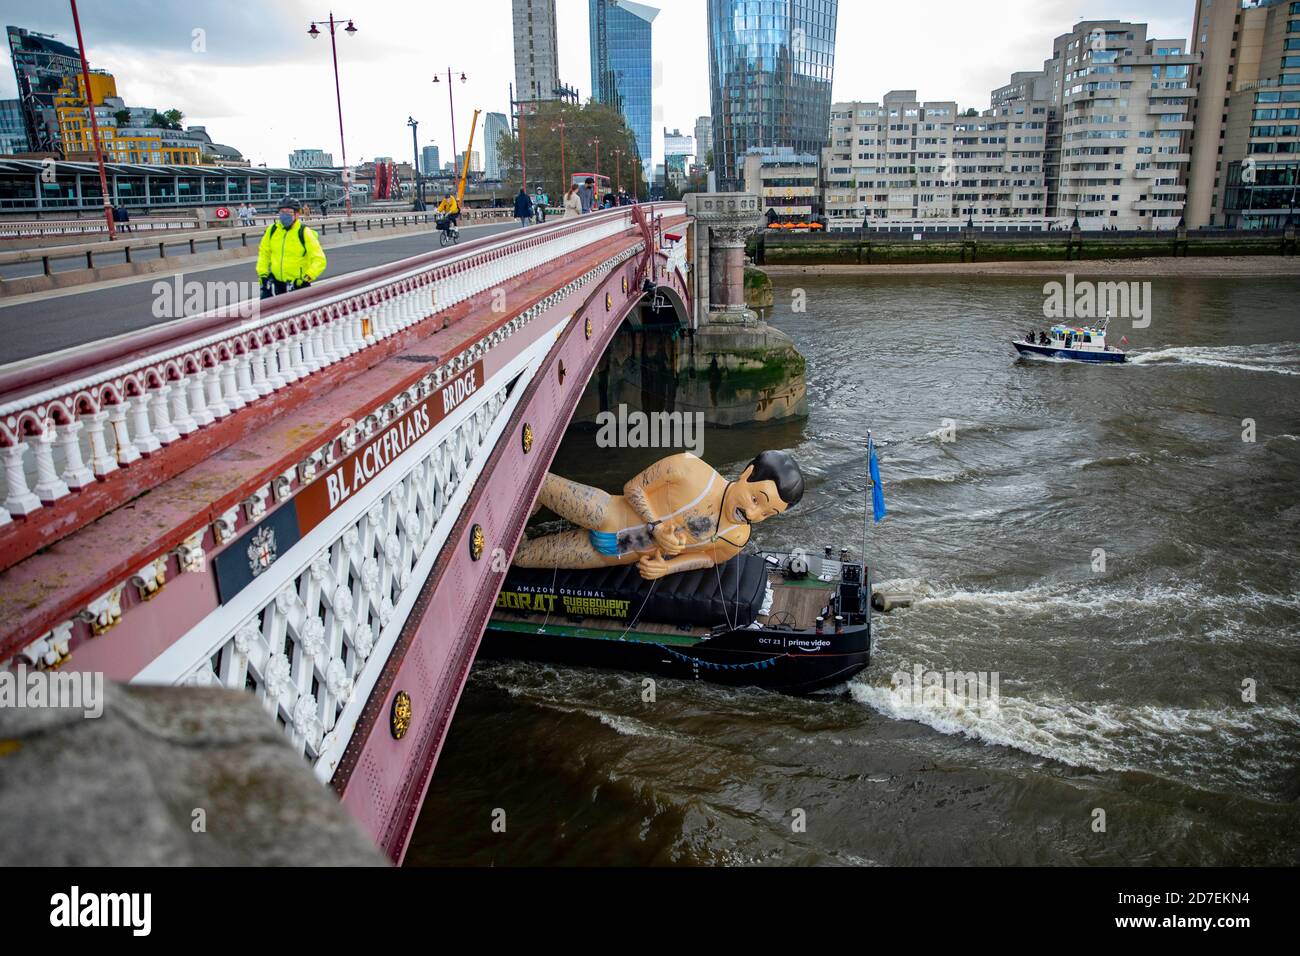 pic shows:  Borat inflatable goes down the Thames in London to promote Borat 2  Masked cyclists cross Blackfriars as the inflatable goes underneath Stock Photo